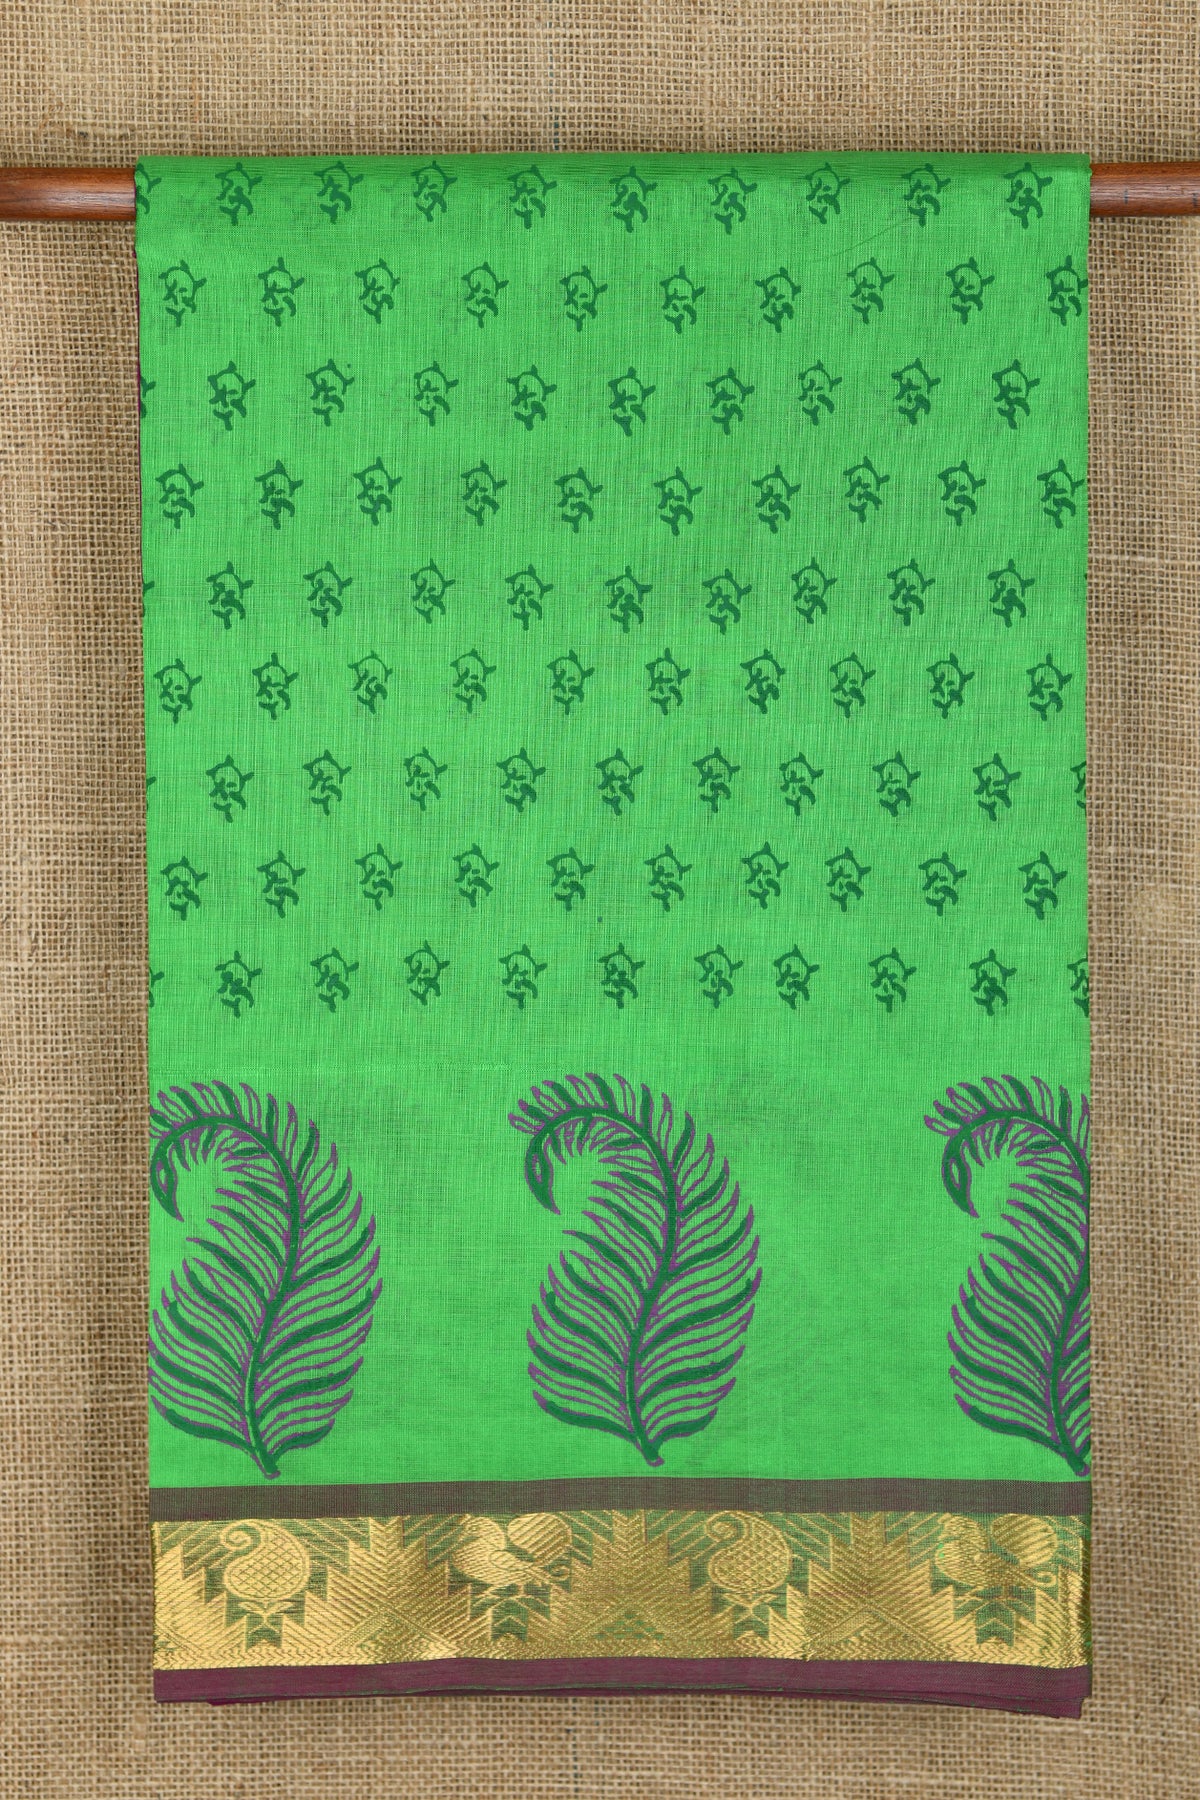 Temple And Paisley Border With Buttis Parrot Green Printed Silk Cotton Saree